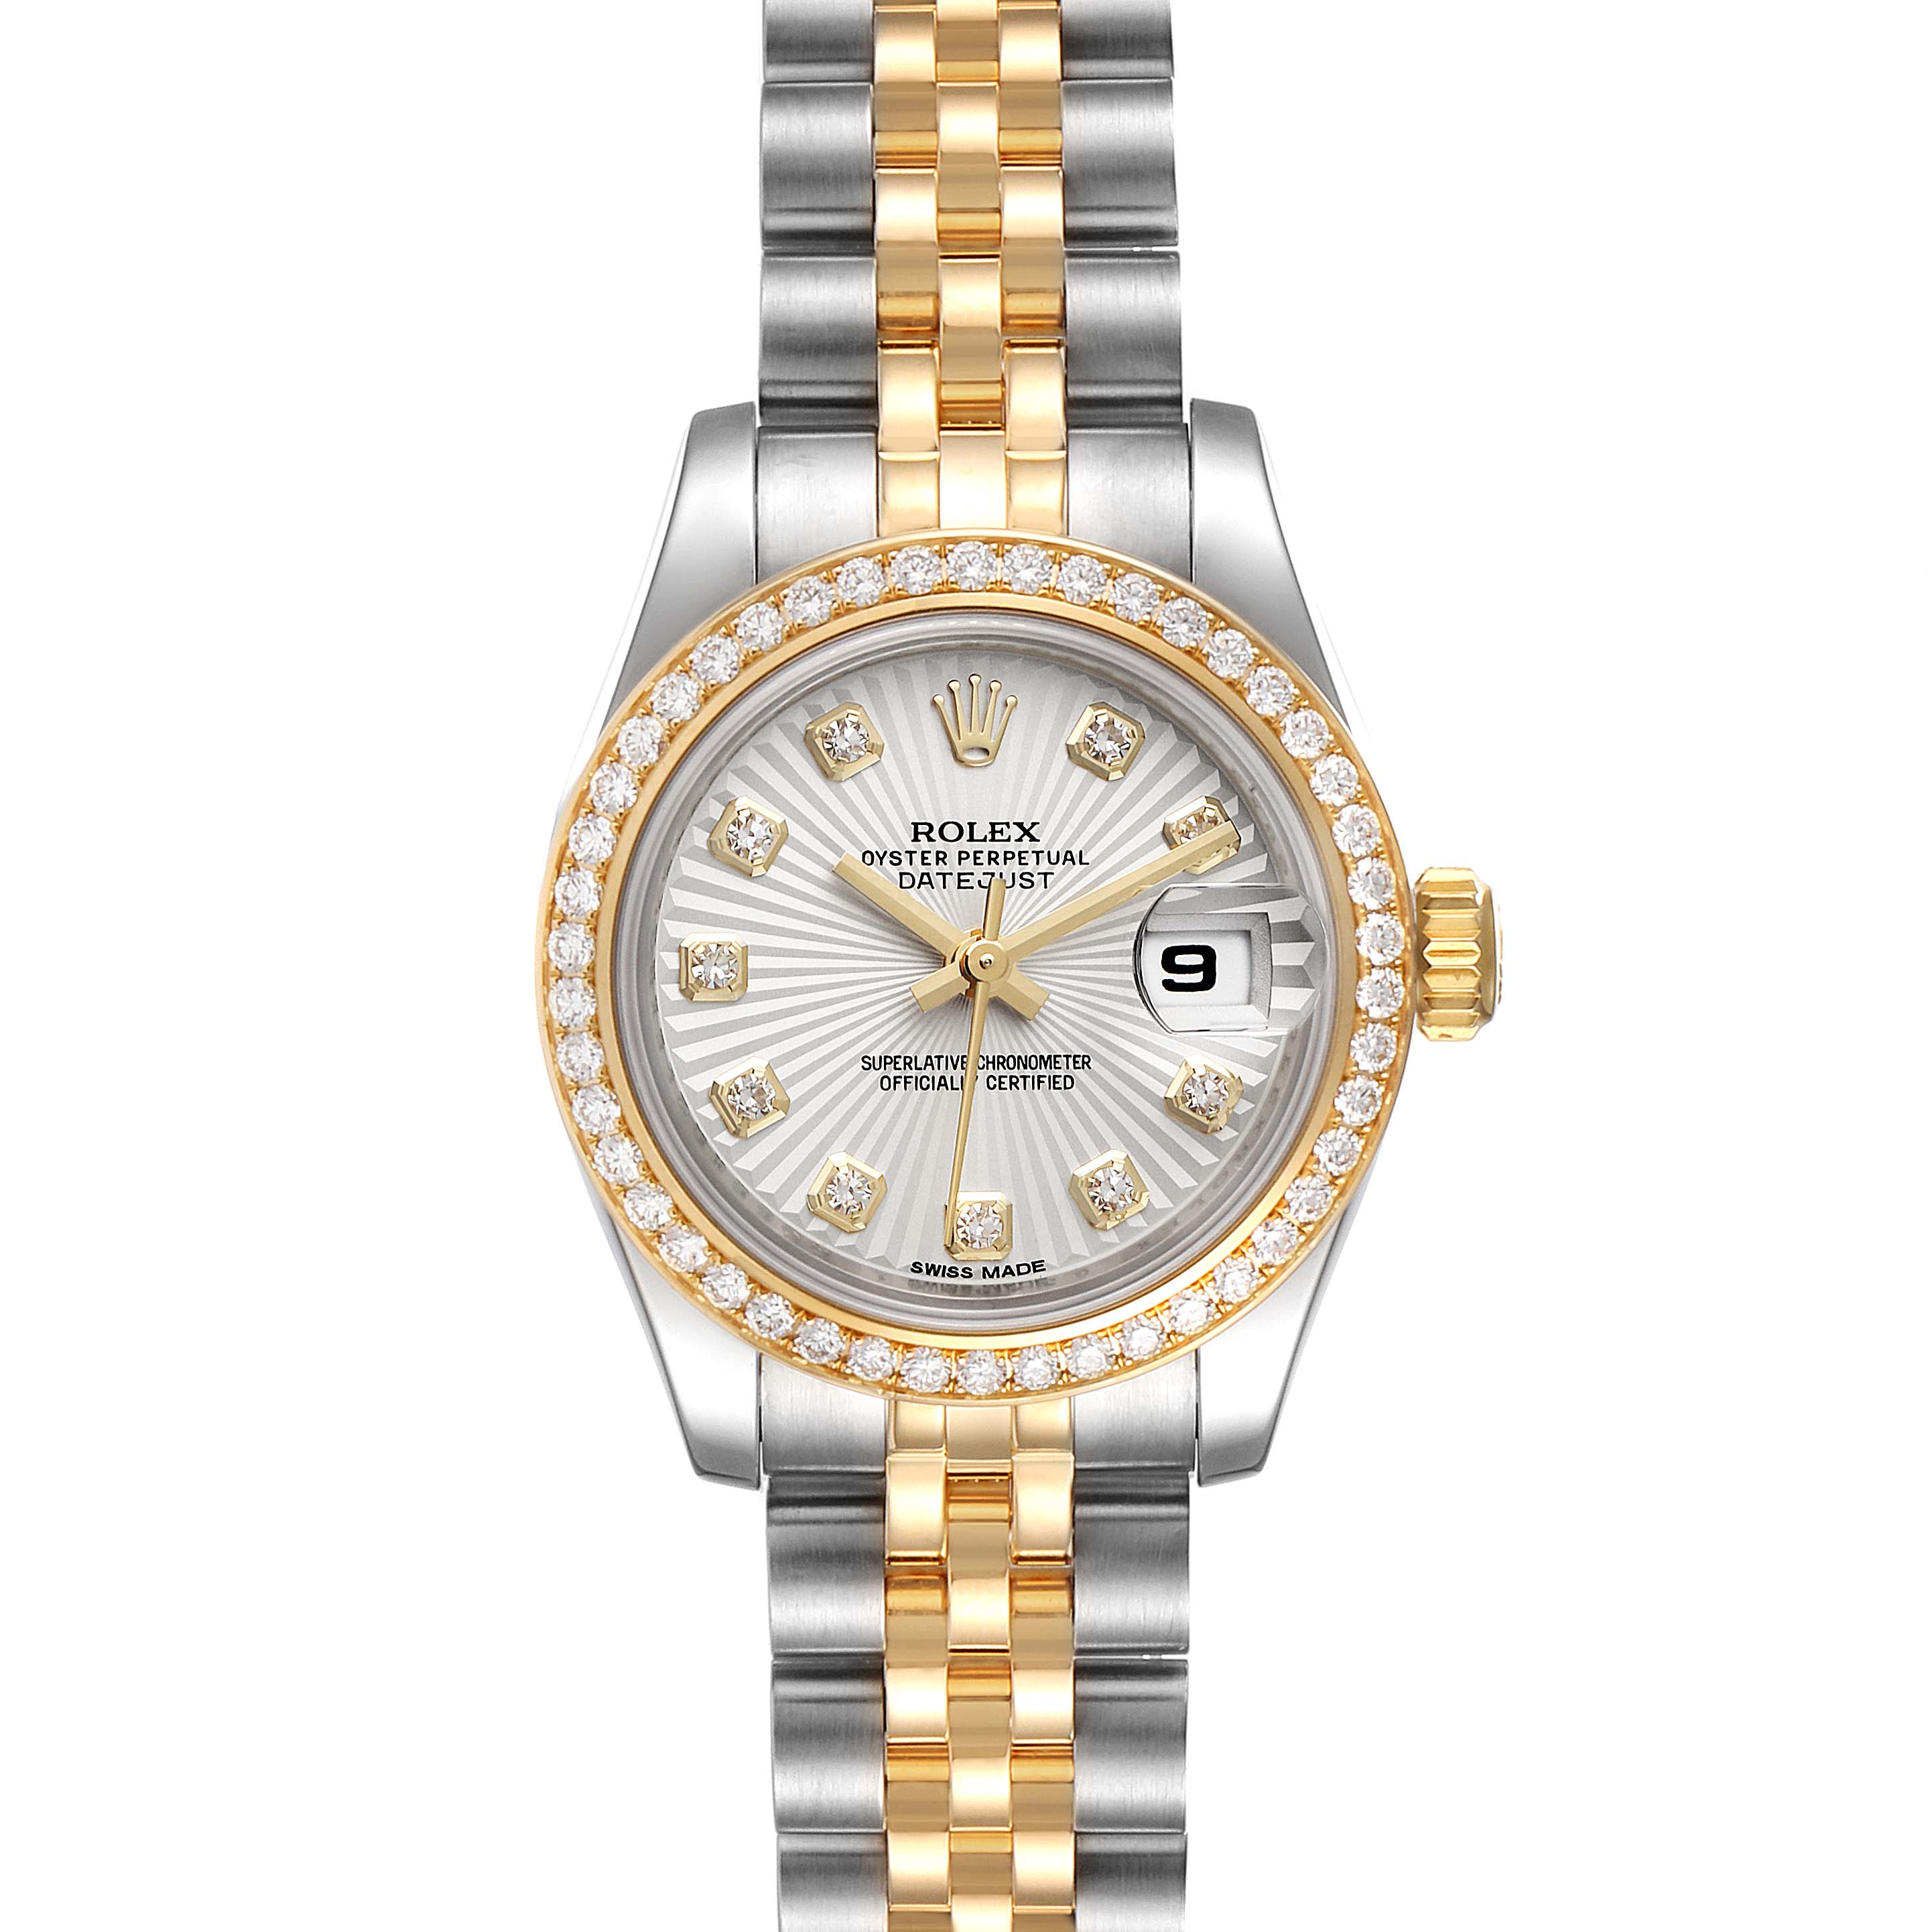 Rolex Lady-Datejust Yellow Gold Fluted Bezel Black Dial for $7,045 for  sale from a Trusted Seller on Chrono24